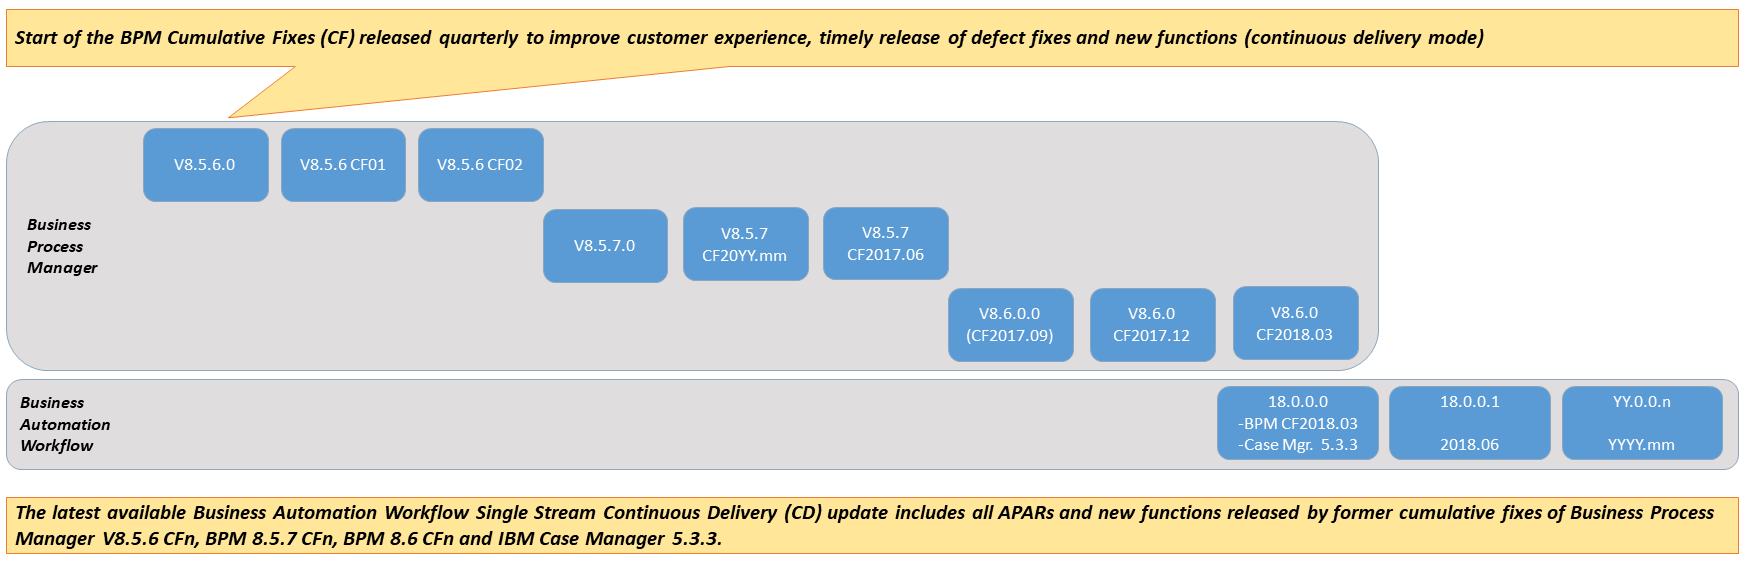 The latest available Business Automation Workflow V18.0.0 Cumulative Fix (CF) includes all APARs and new functions released by former cumulative fixes of Business Process Manager V8.5.6 CFs, IBM BPM V8.5.7 CFs, IBM BPM V8.6 CFs, and IBM Case Manager V5.3.3